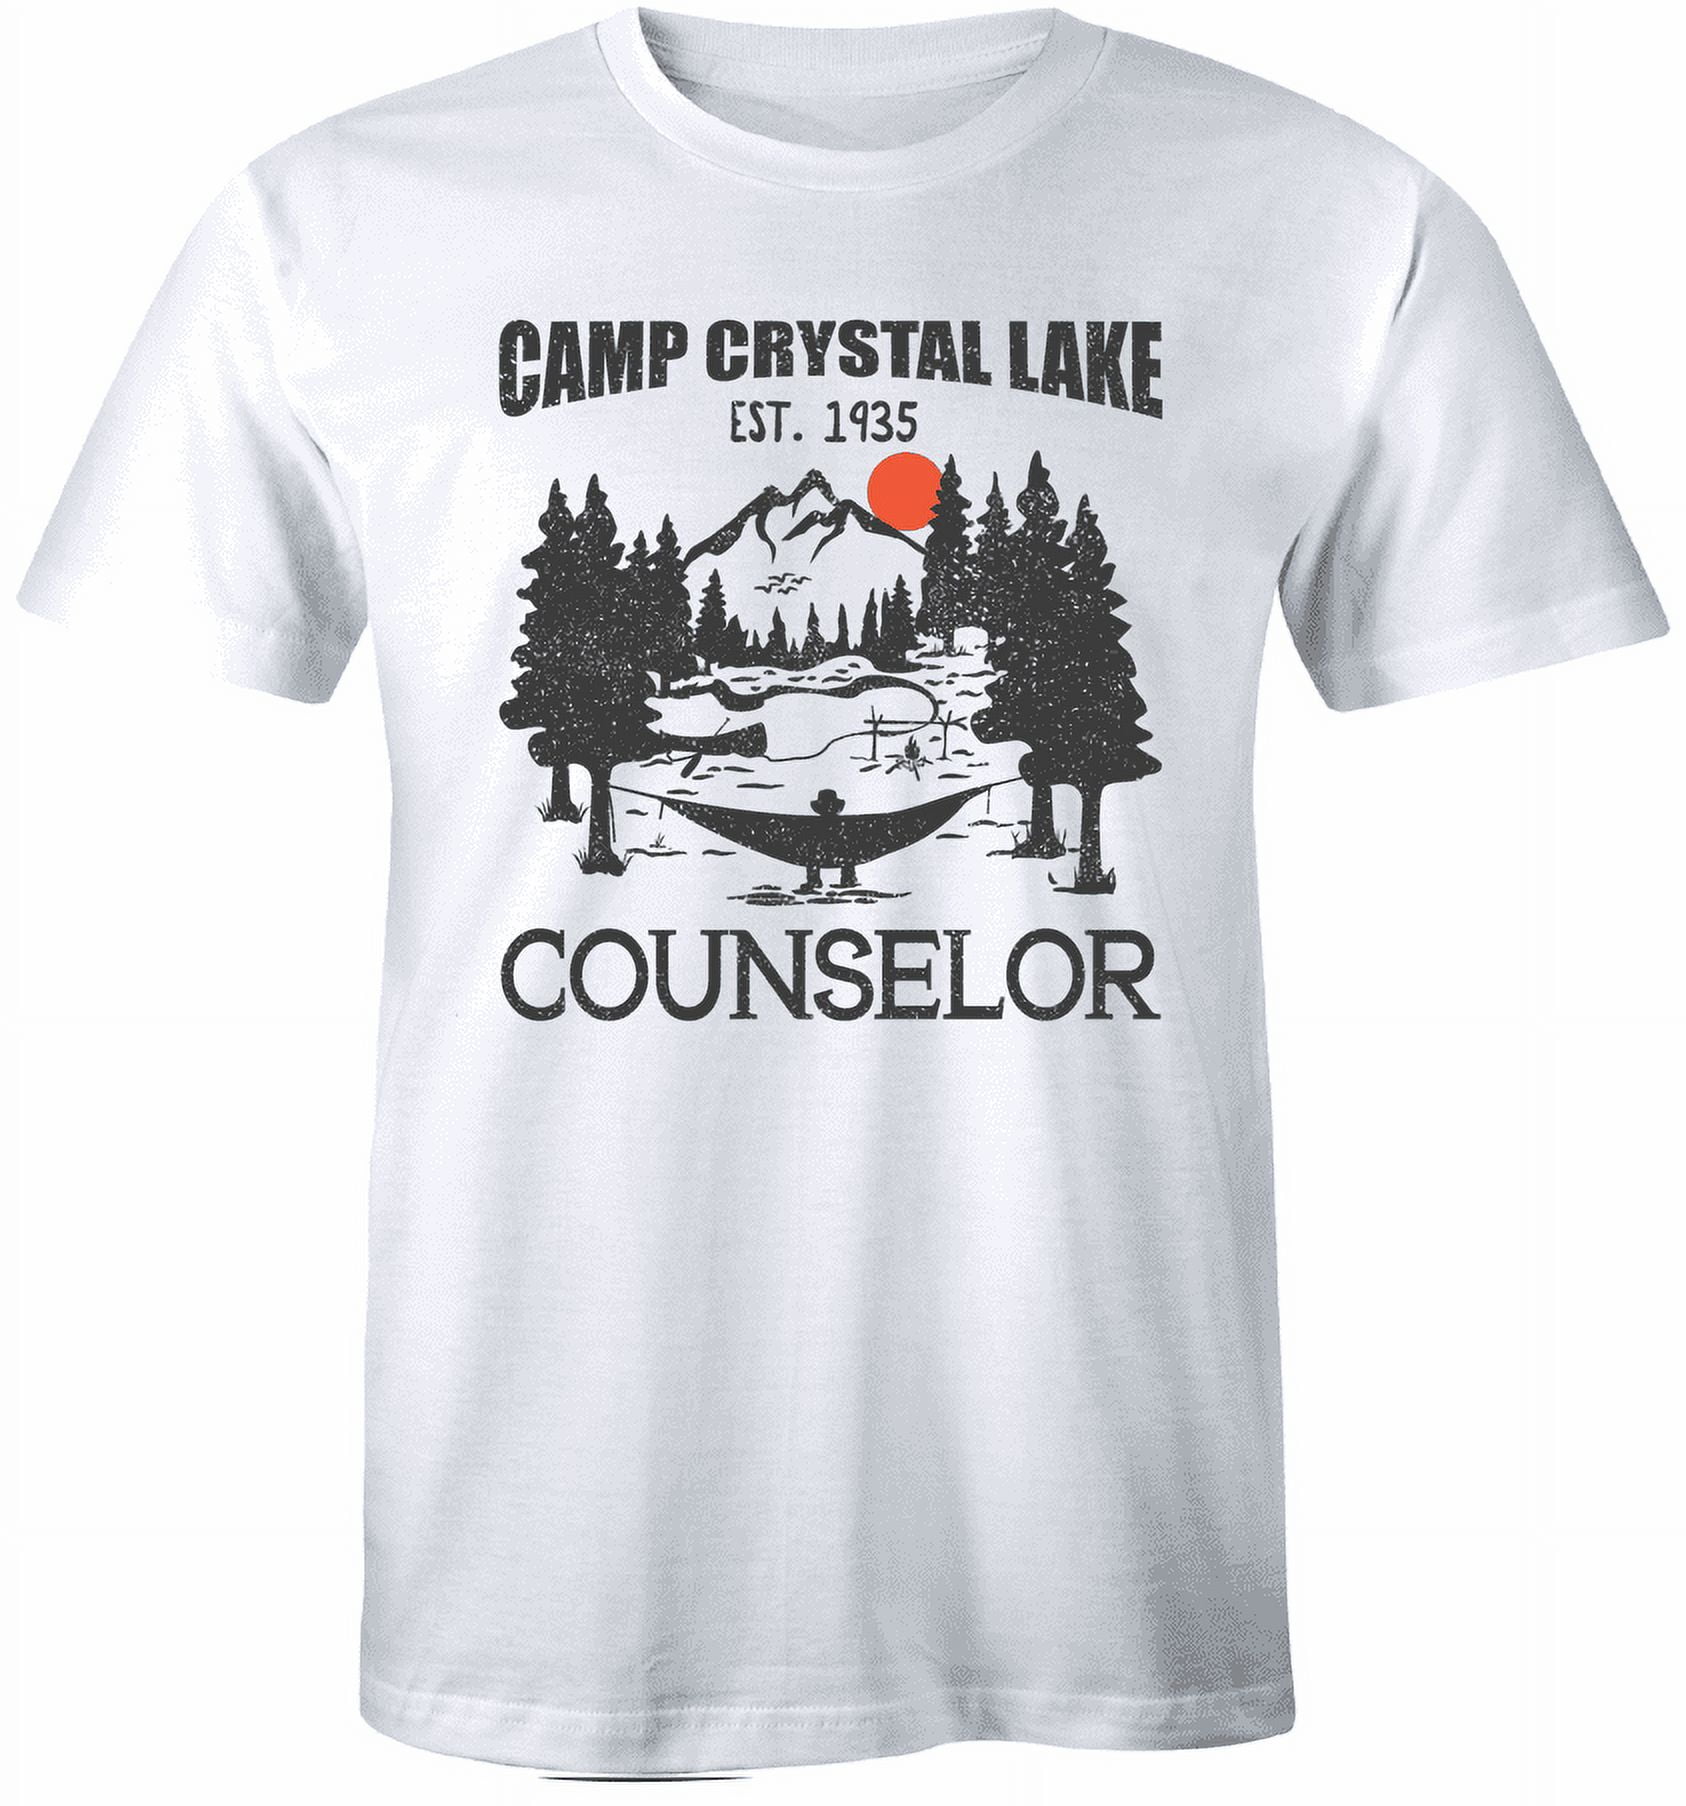 Camp Crystal Lake Est 1935 Counselor T-Shirt Funny Camping 80s Vintage Tee